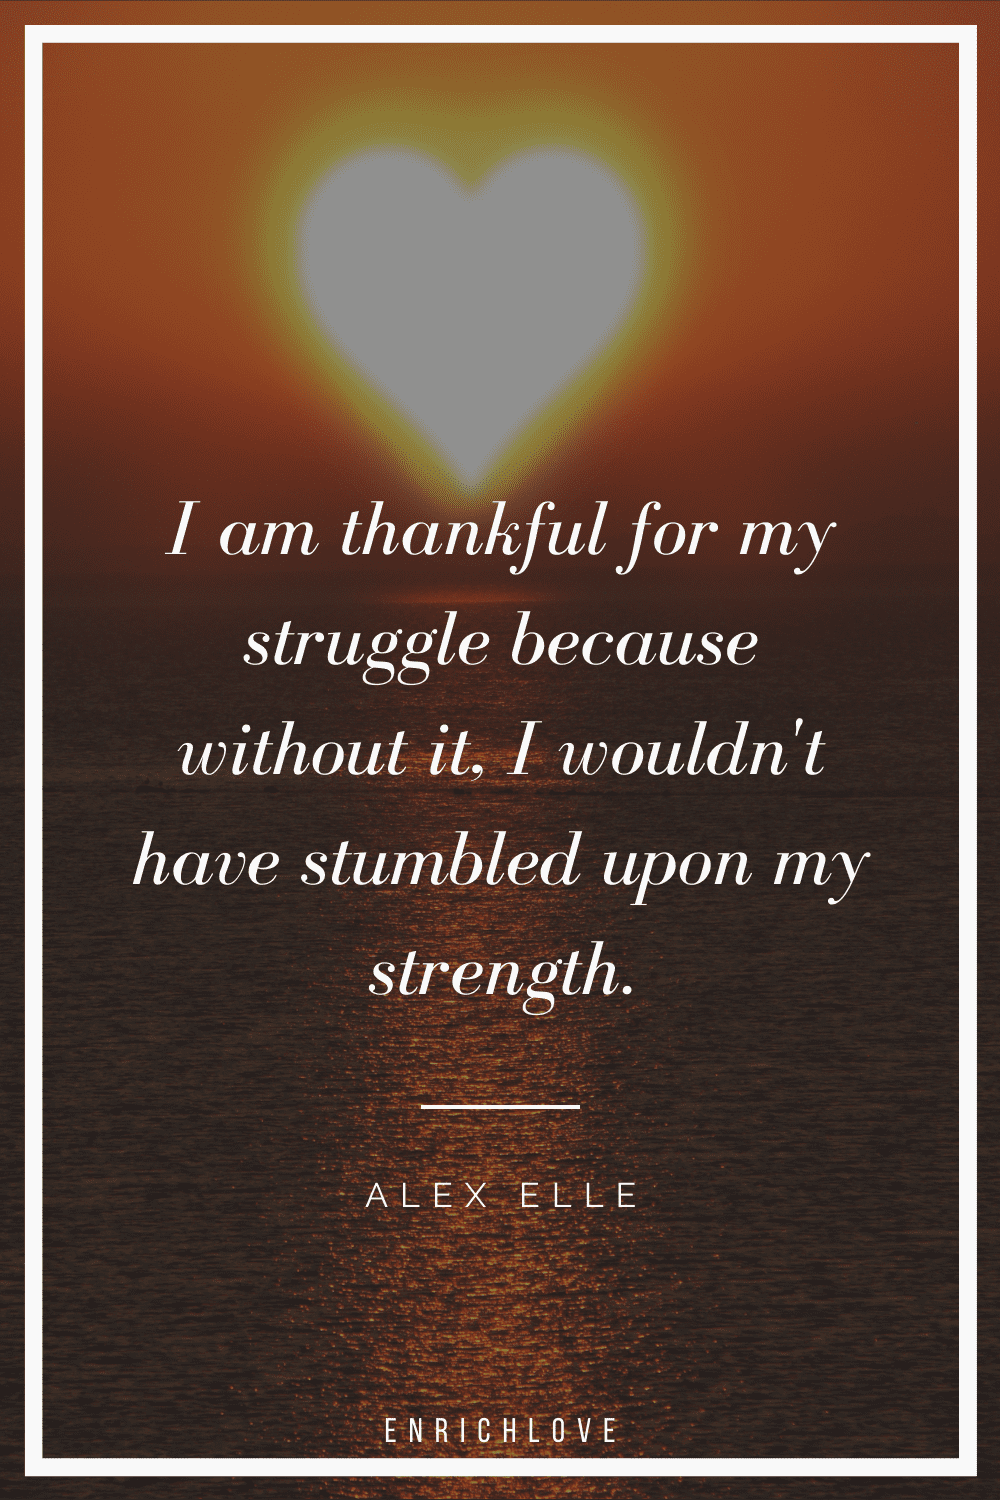 I am thankful for my struggle because without it, I wouldn't have stumbled upon my strength.